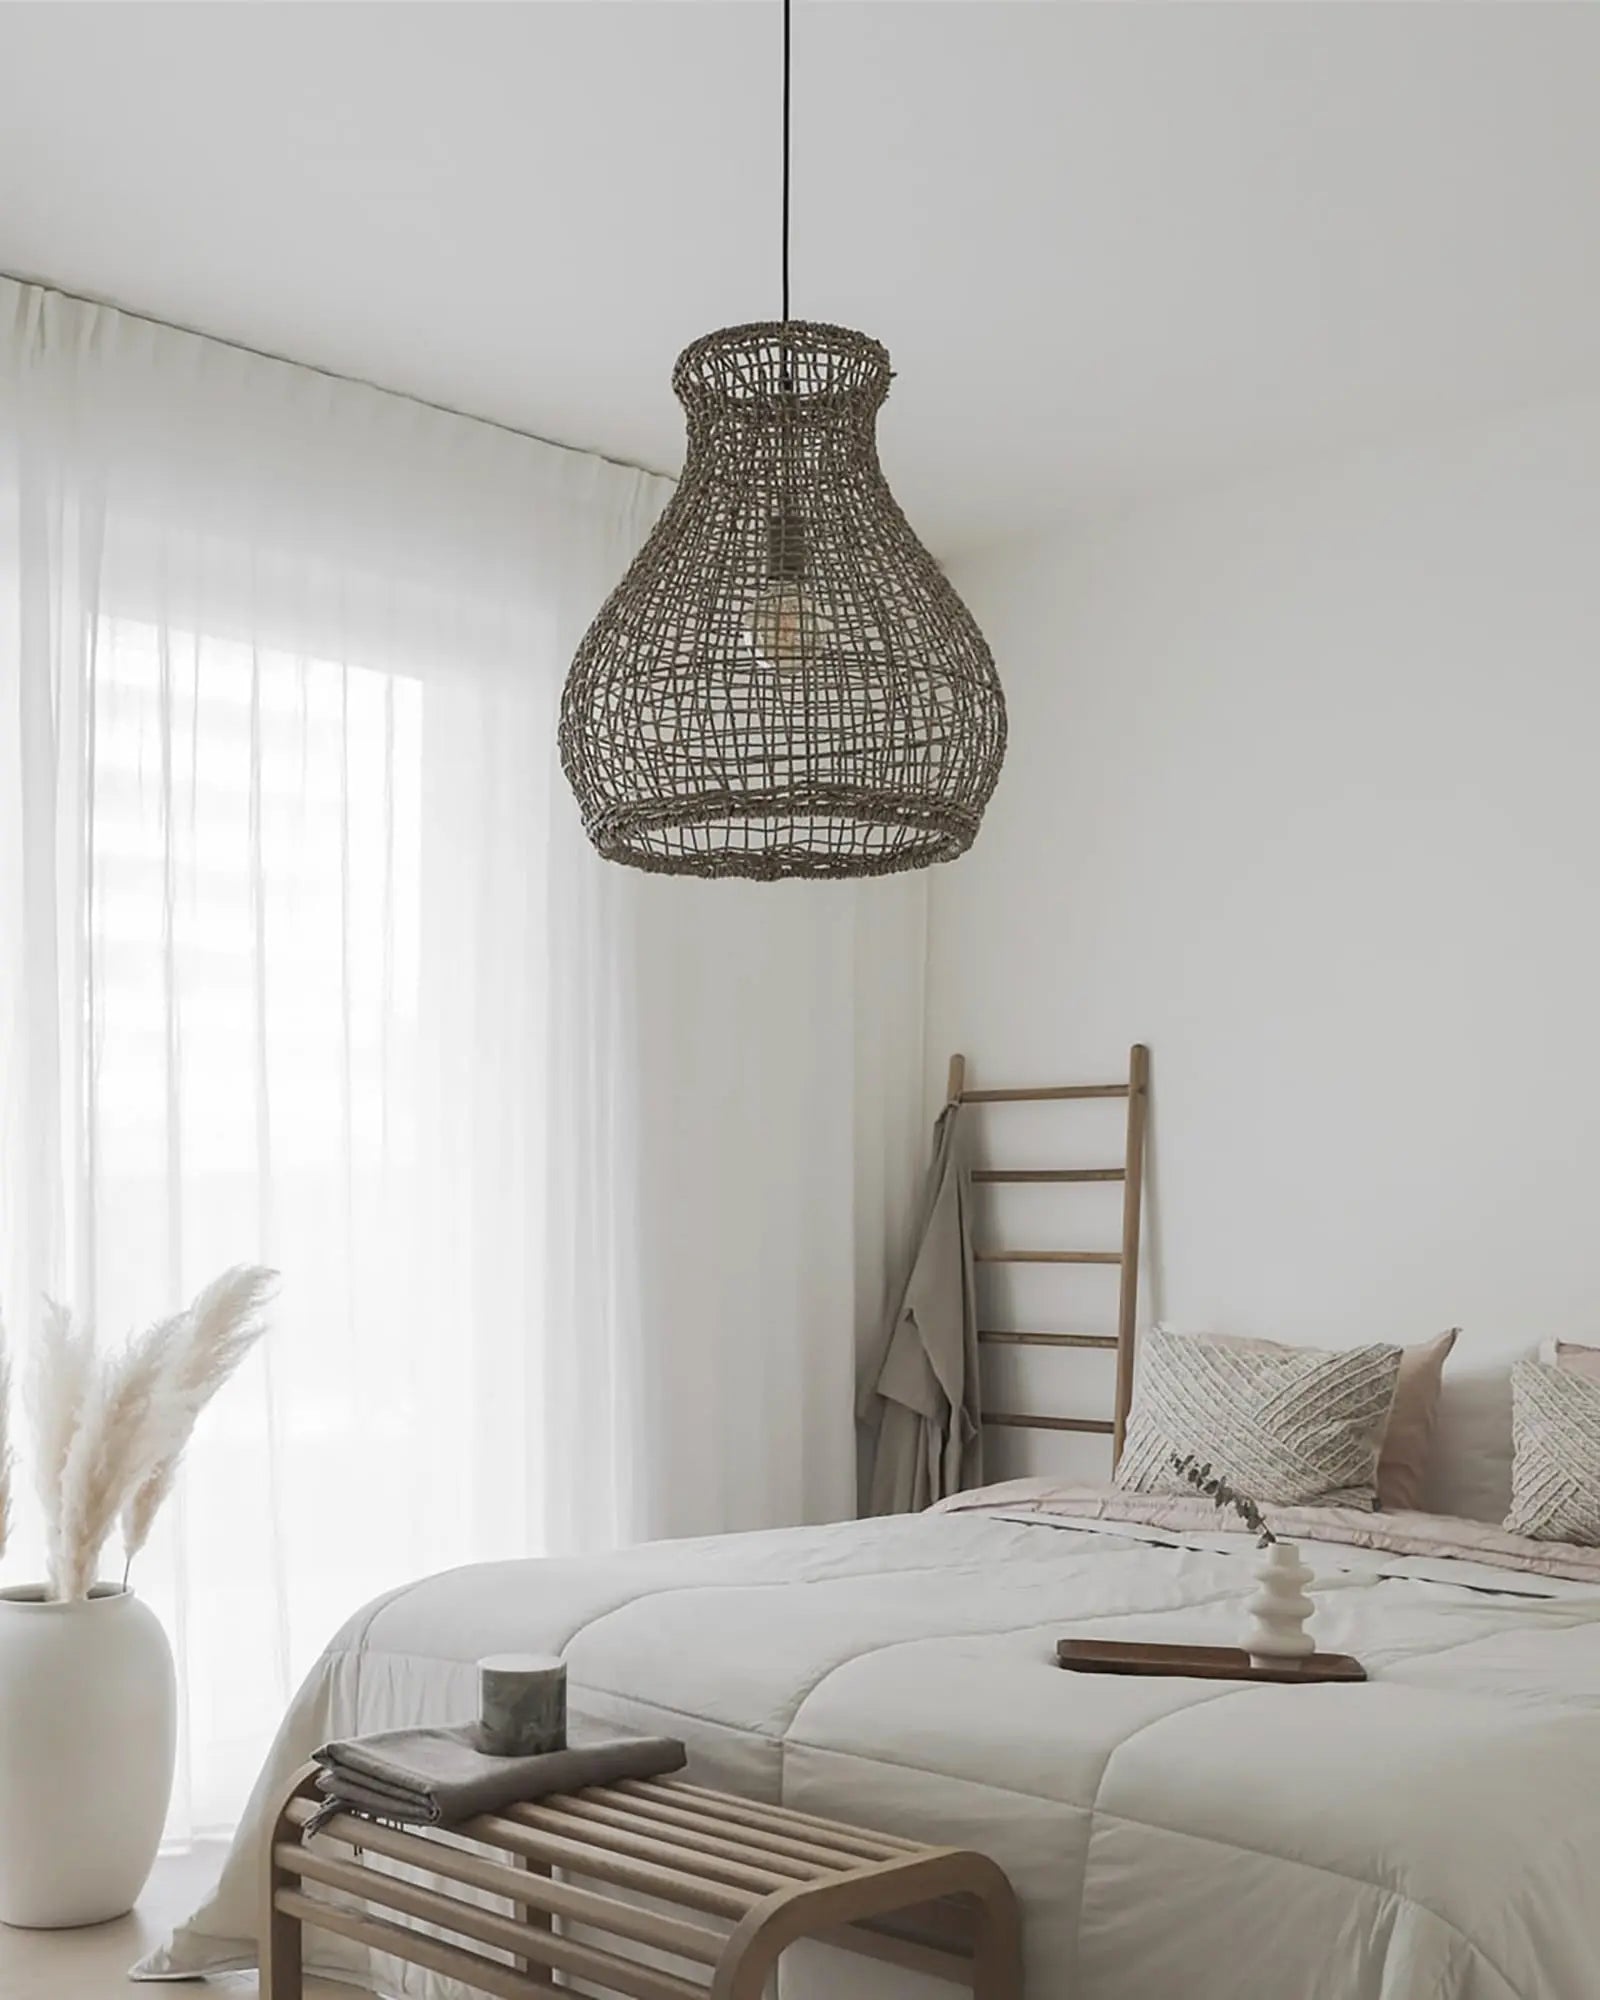 Seagrass organic pendant light above a bed